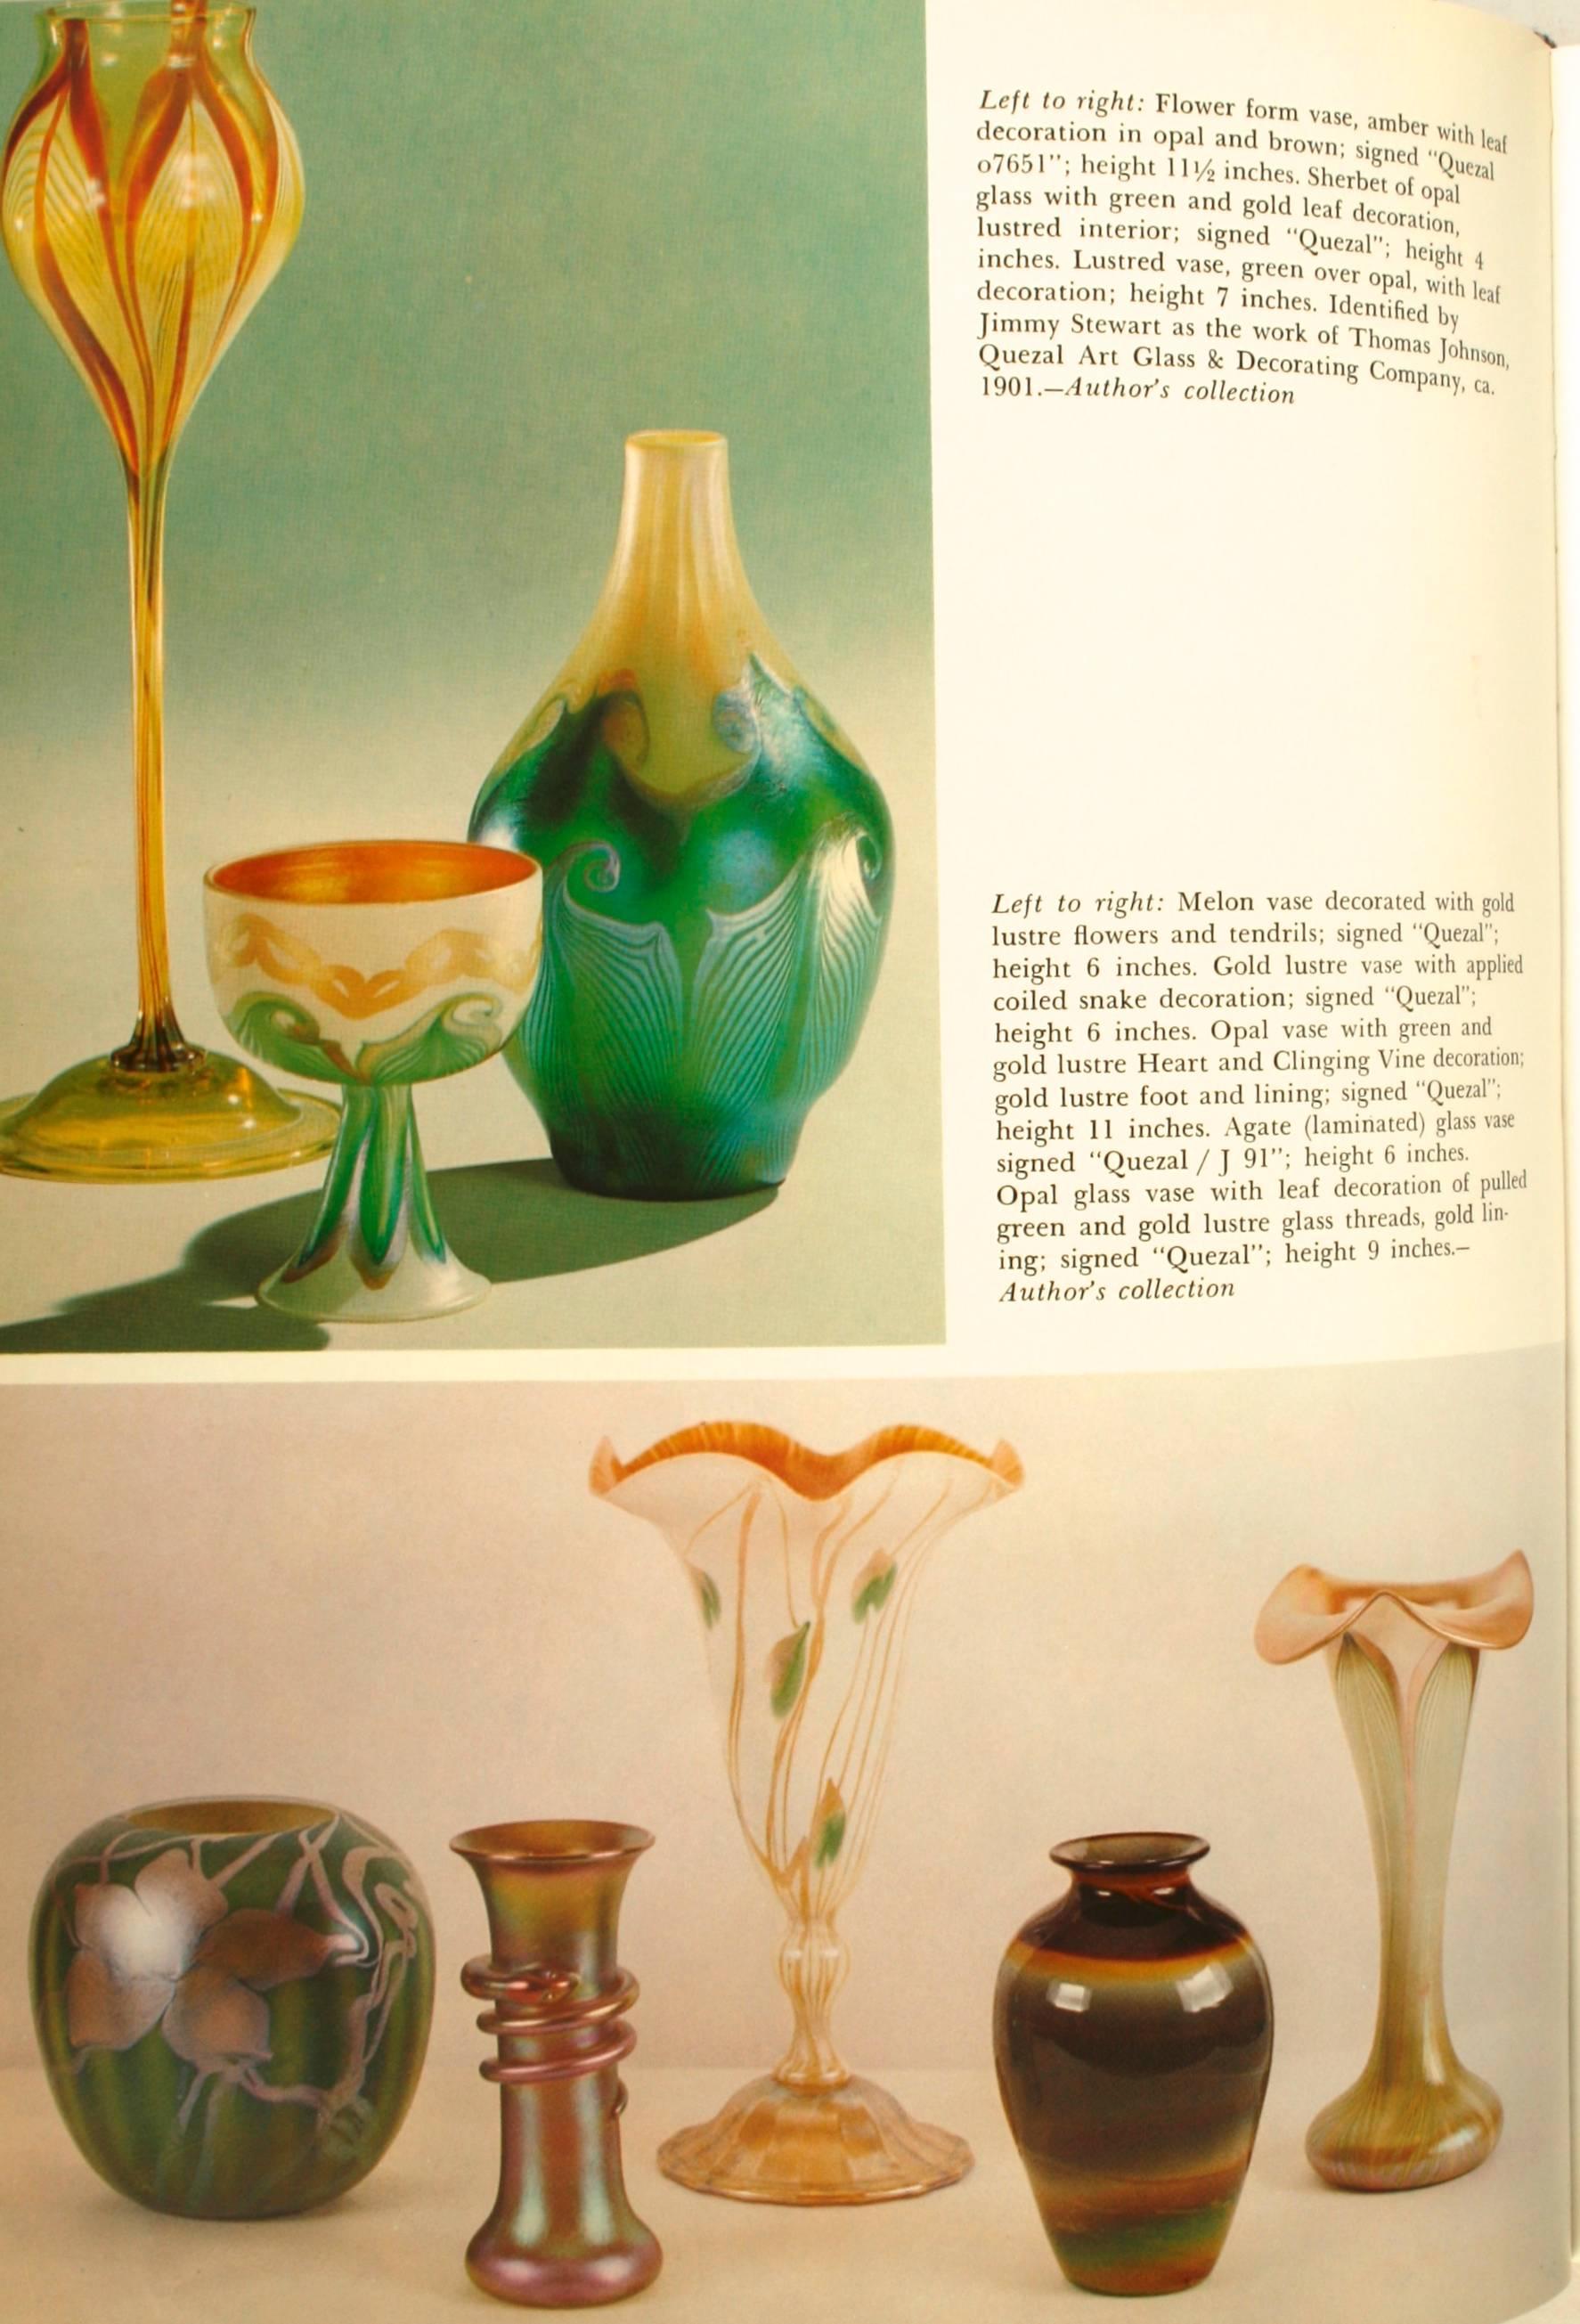 Paper American Art Nouveau Glass by Albert C Revi, First Edition For Sale